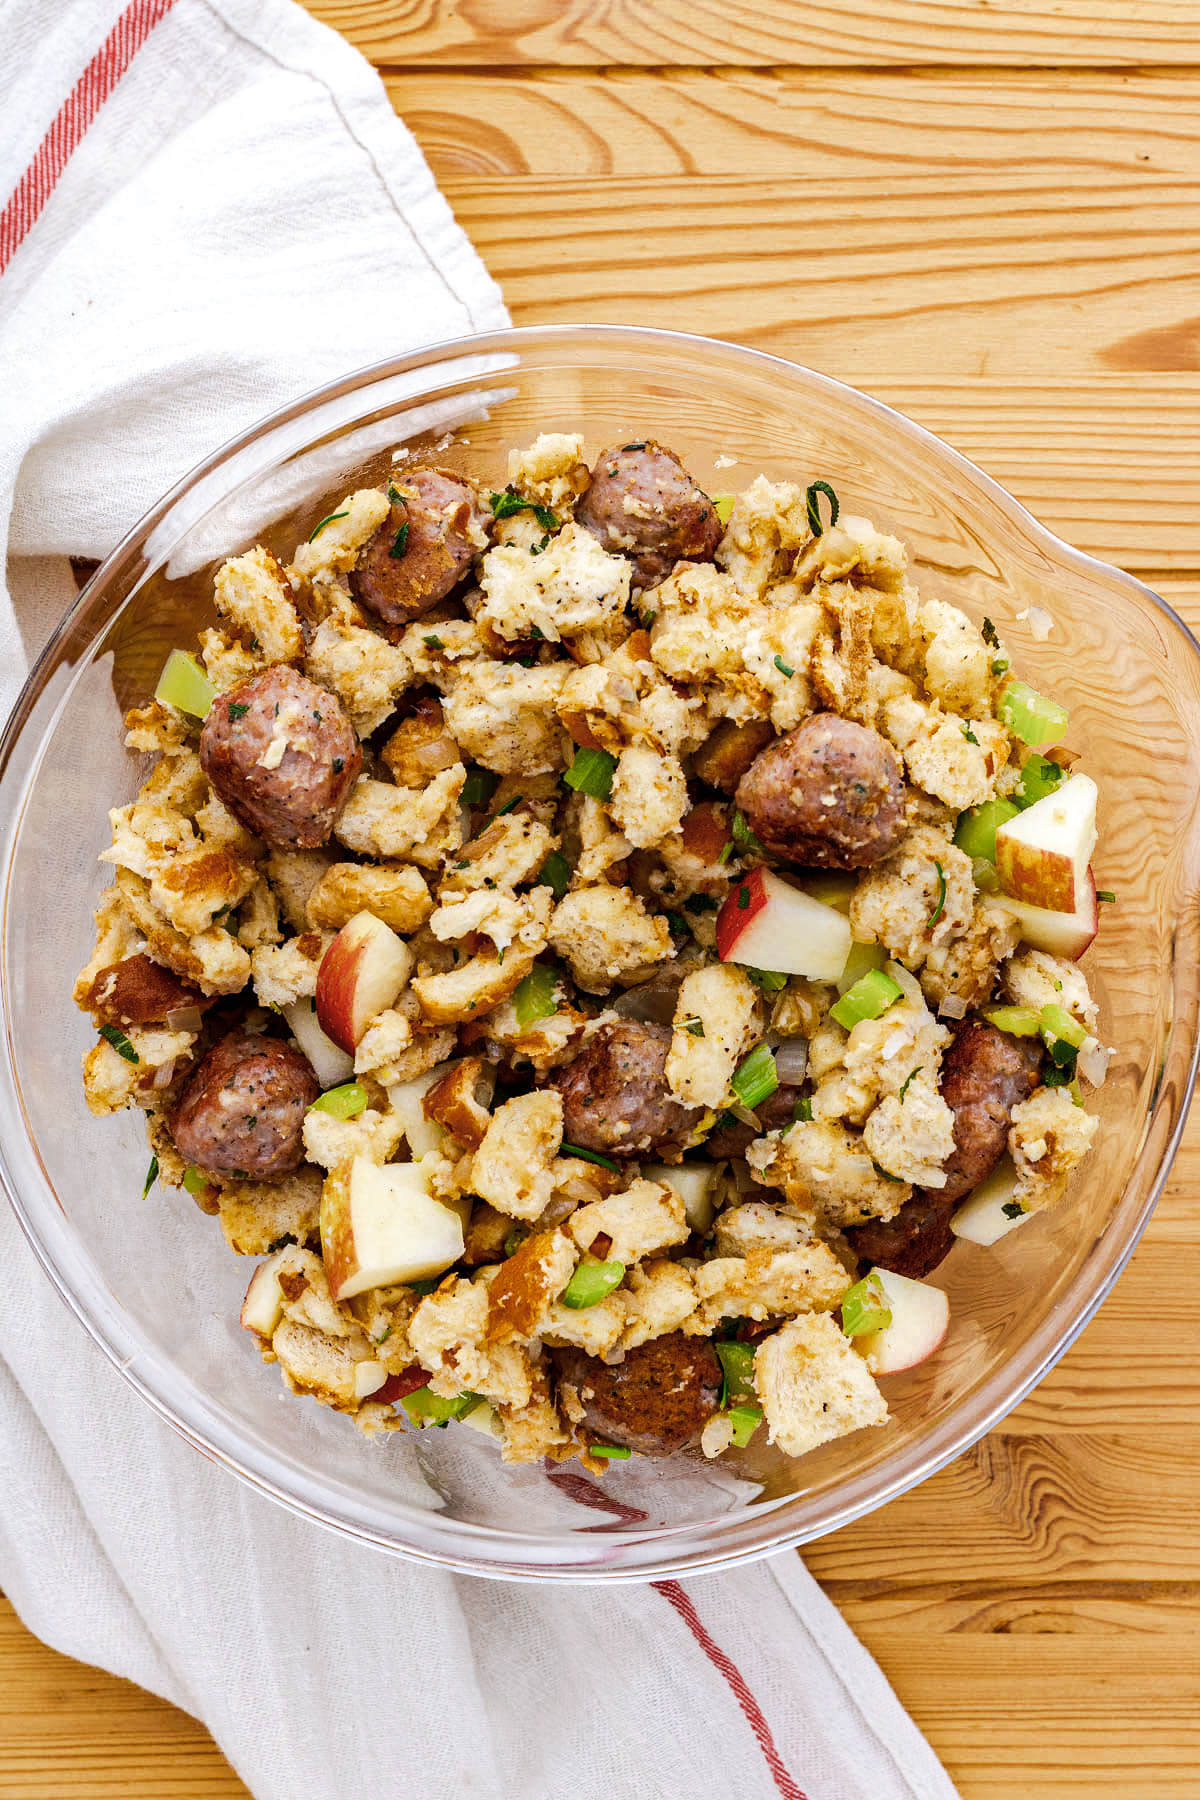 A glass mixing bowl full of unbaked Apple Sausage stuffing ingredients.